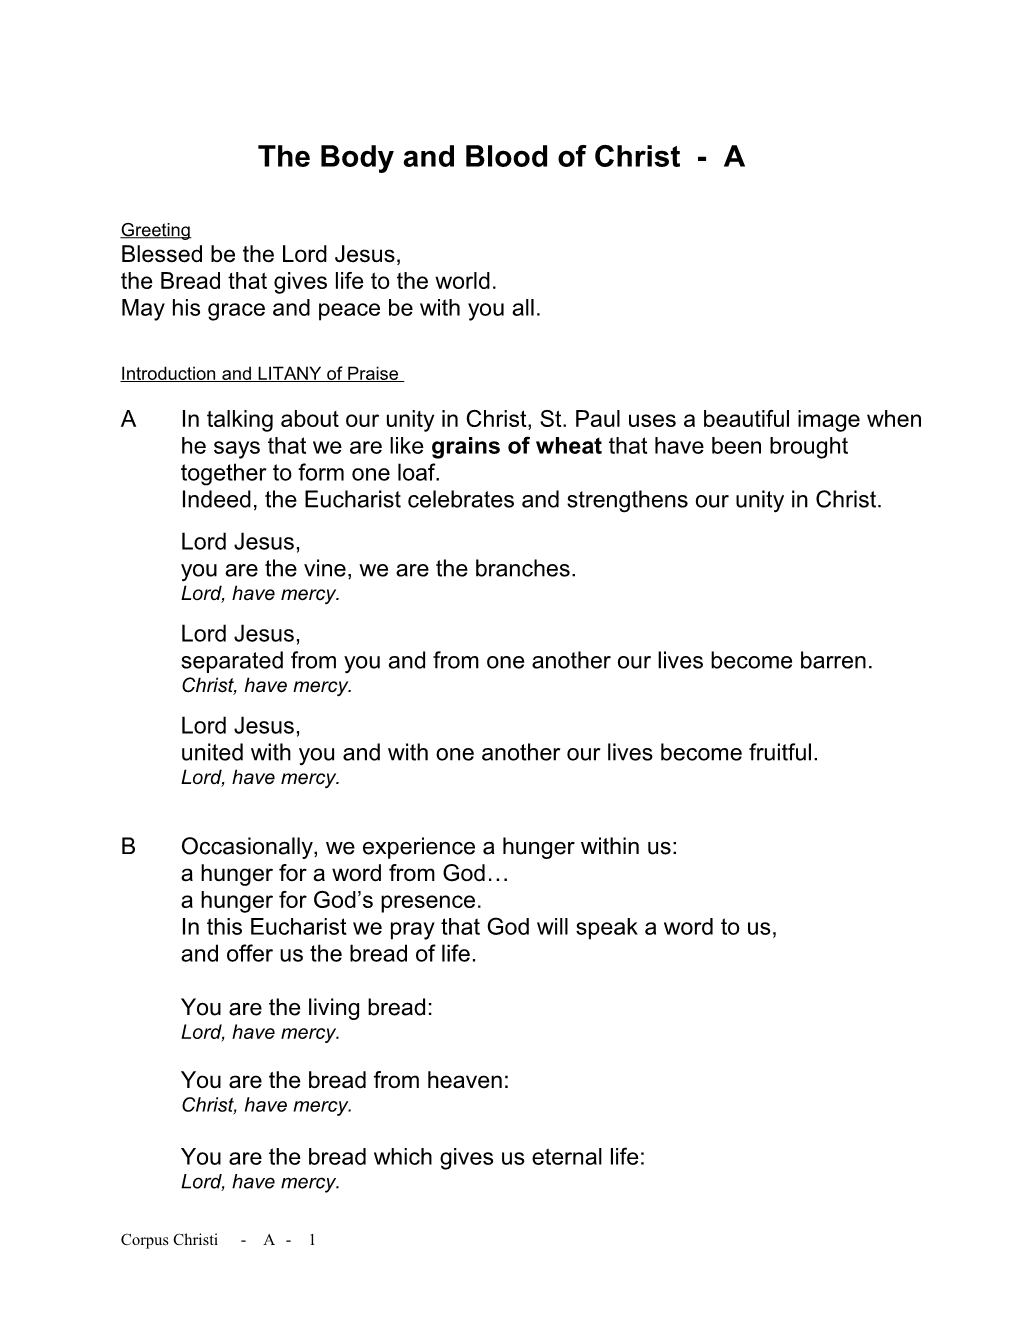 The Body and Blood of Christ - Year B